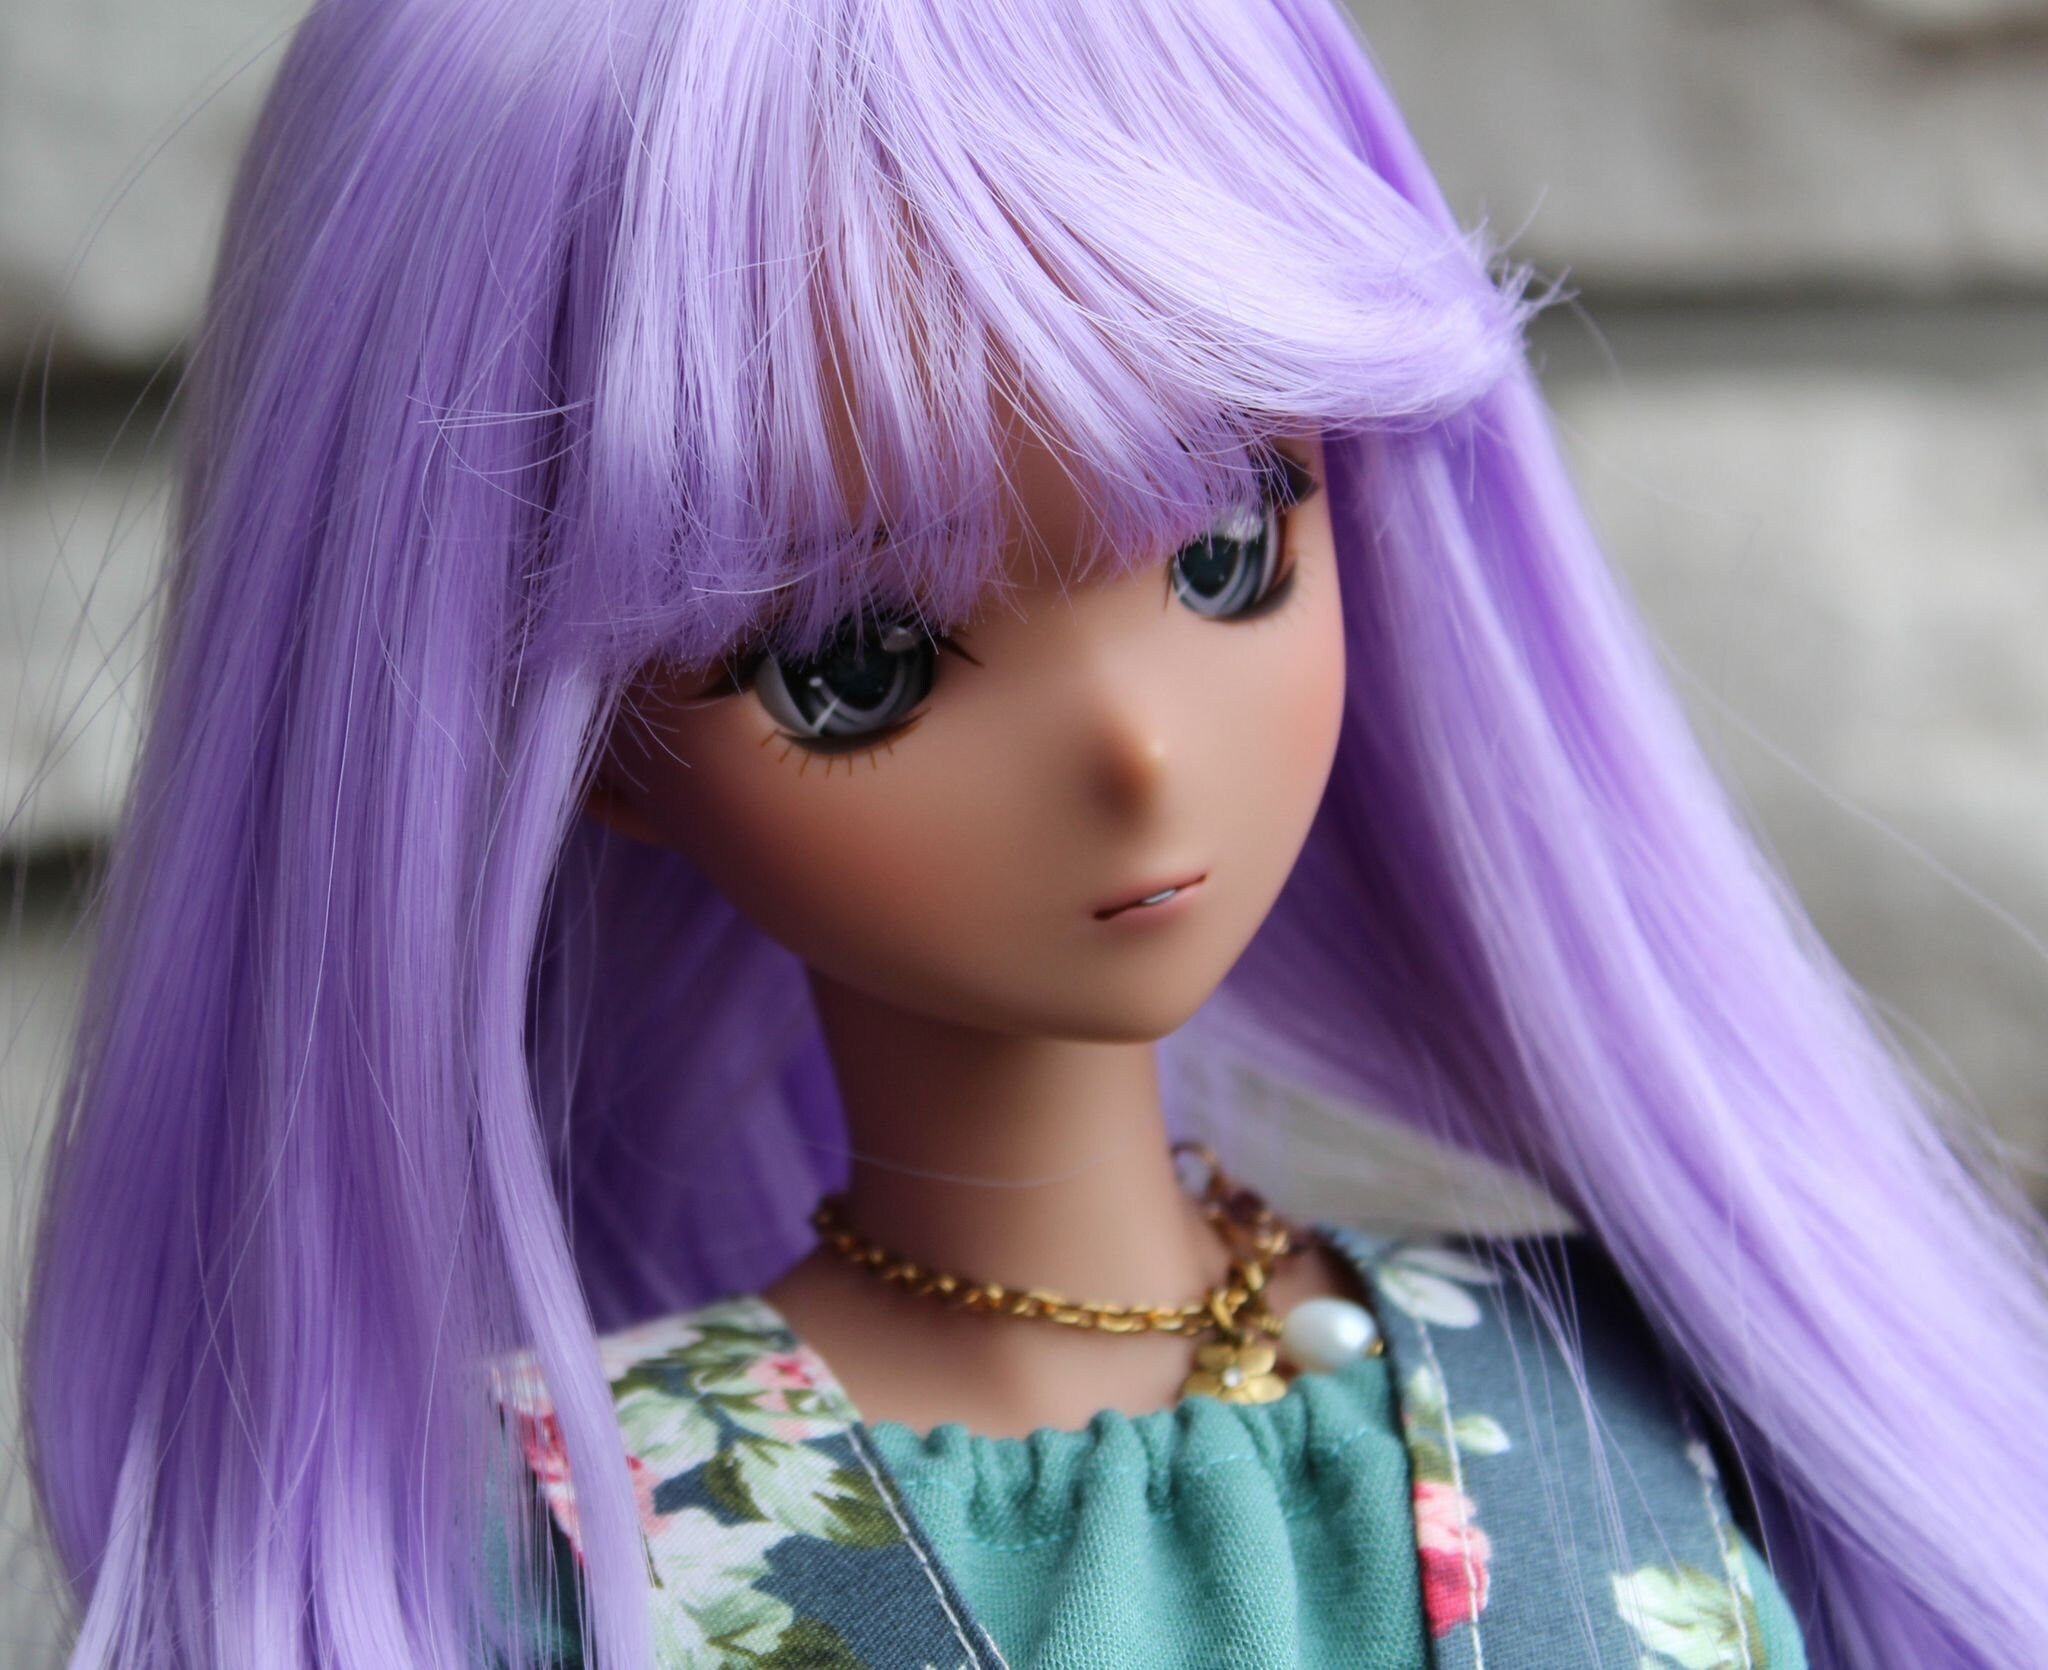 Custom doll WIG for Smart Dolls- Heat Safe - Tangle Resistant- 8.5" head size of Bjd, Sd, Dollfie Dream dolls "TAN CAPS" Mauve ombre Limited